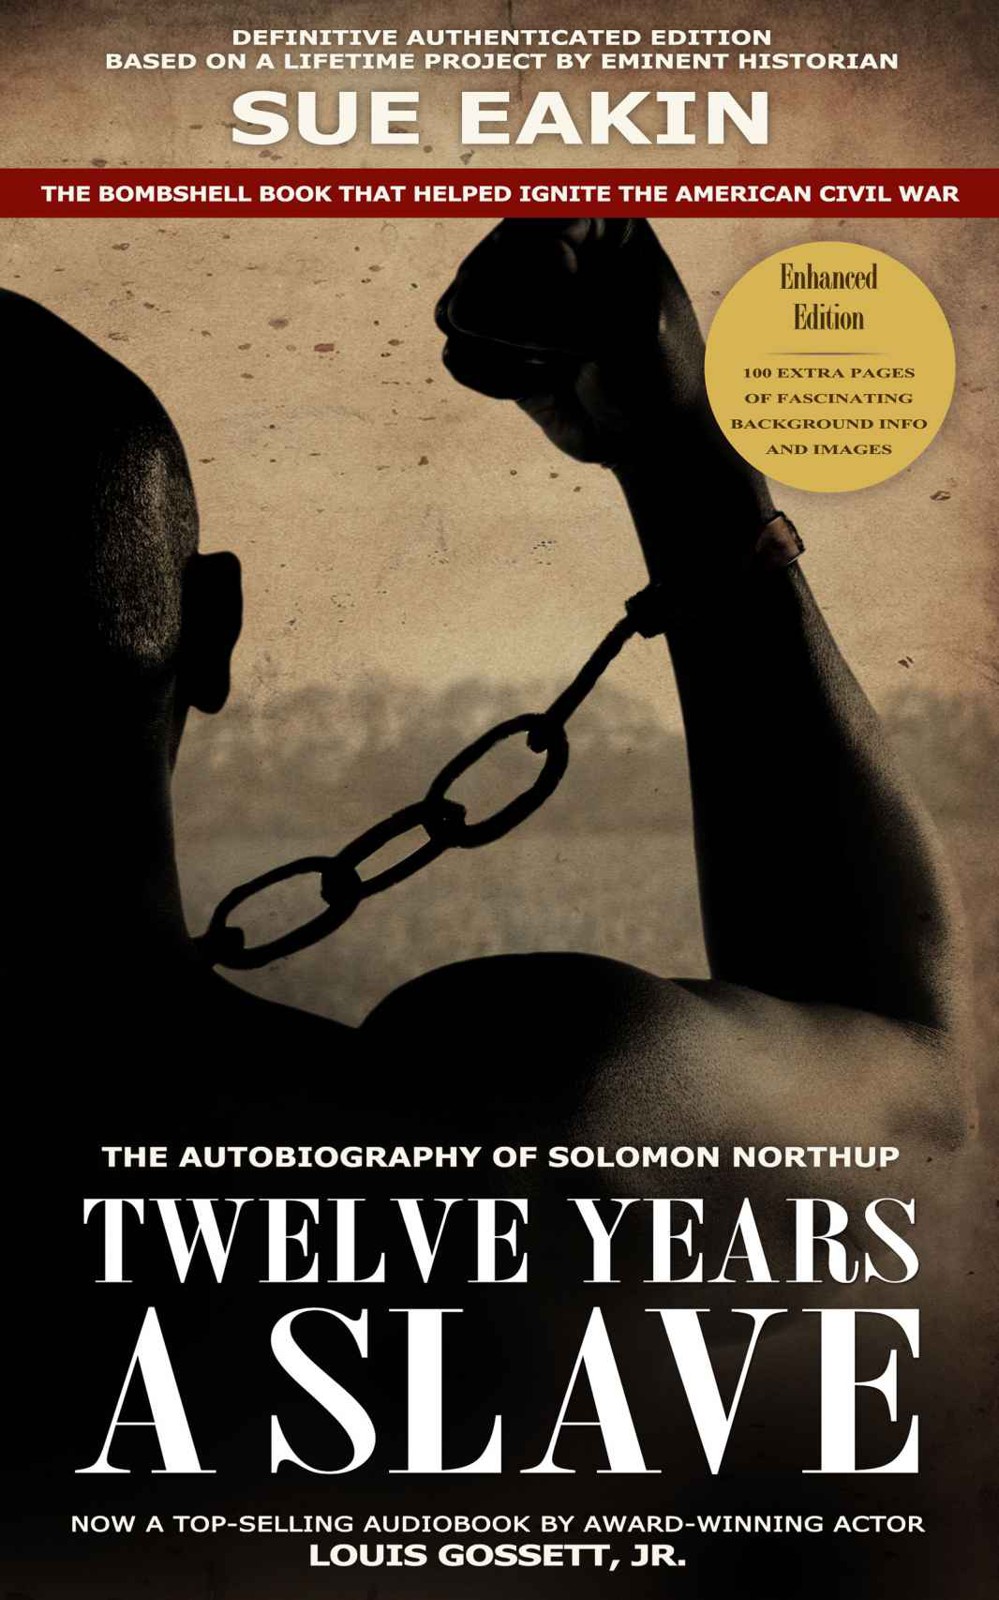 Twelve Years a Slave - Enhanced Edition by Solomon Northup